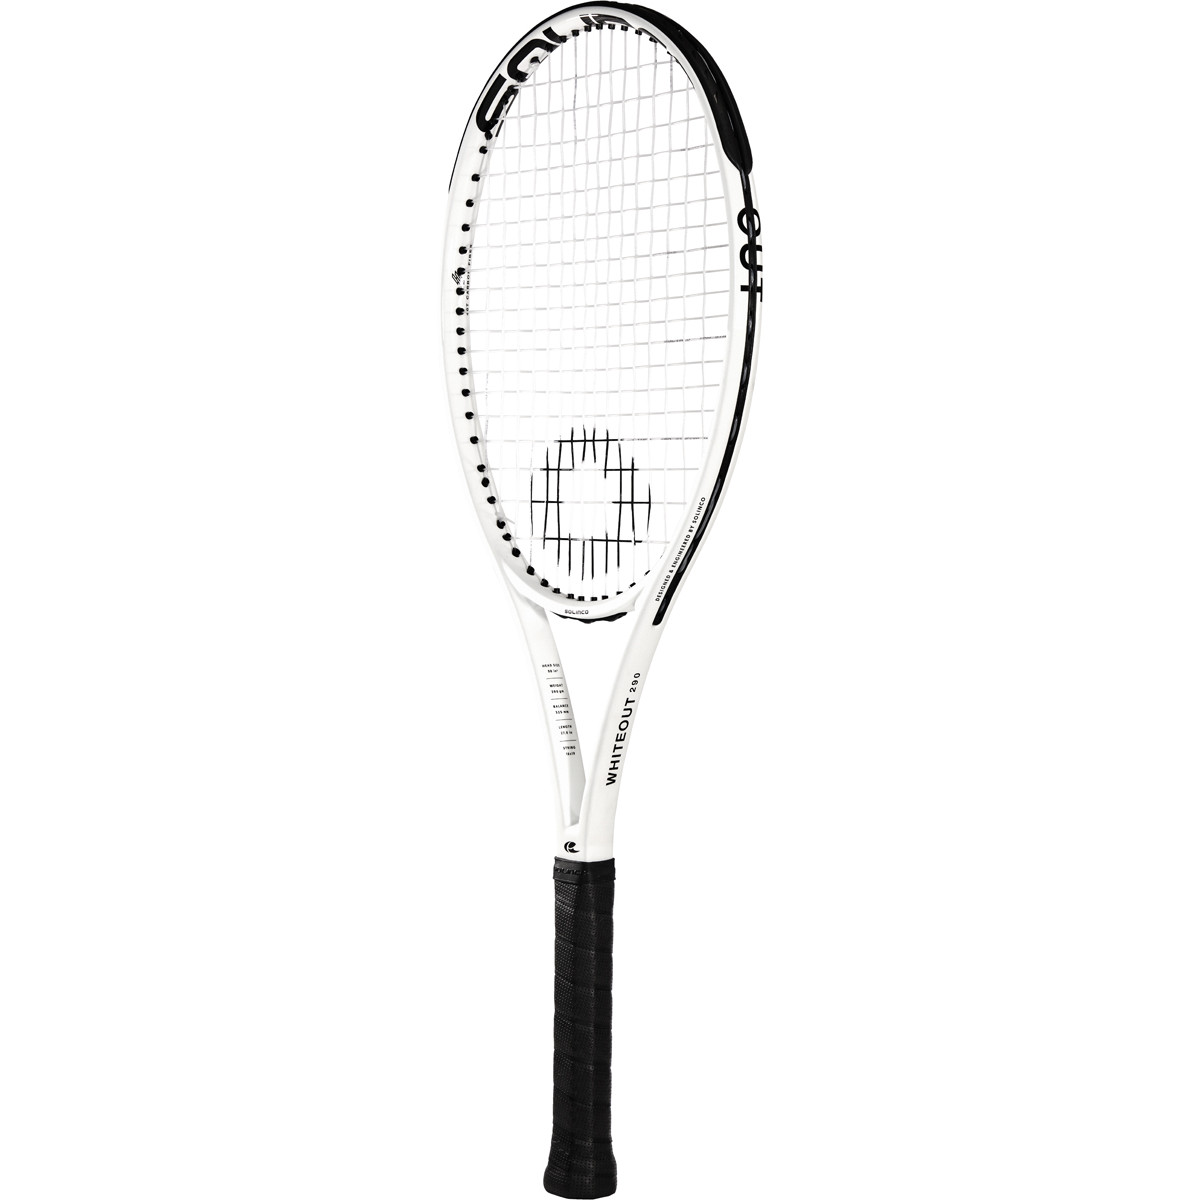 SOLINCO WHITEOUT TENNIS RACQUET (290 GR) - SOLINCO - Adult